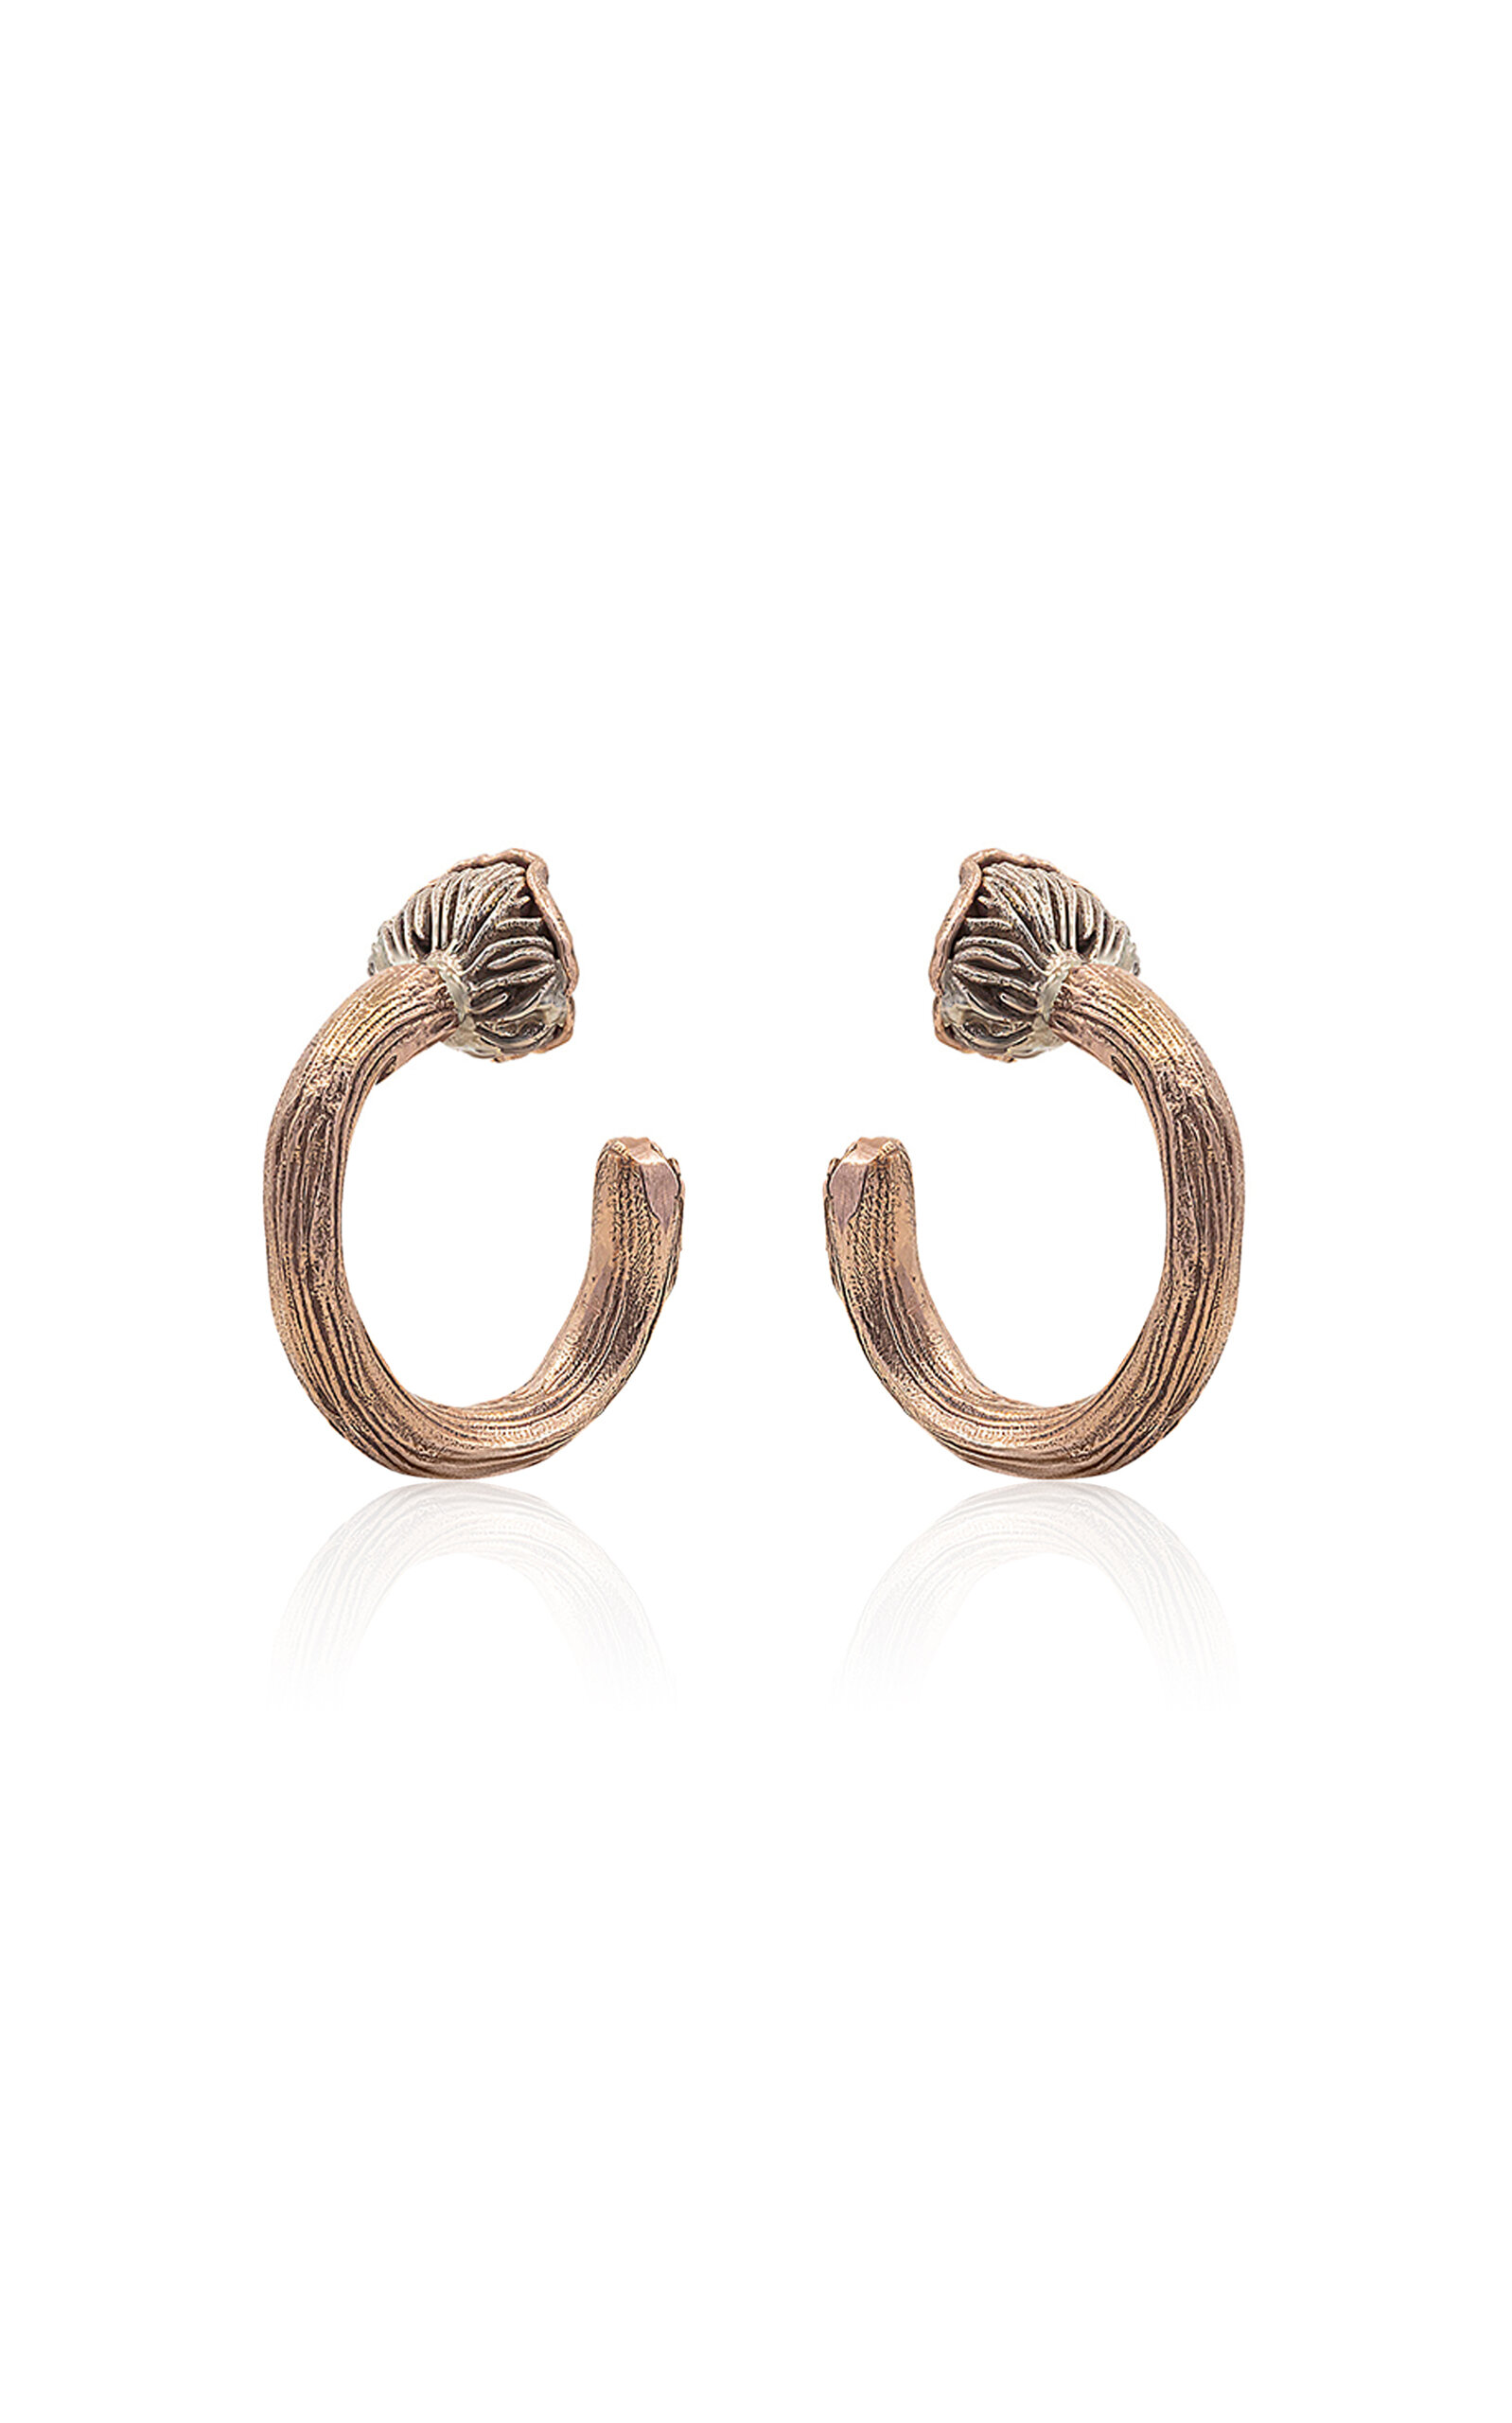 Bernard James Fungi Laccaria 14k White And Rose Gold Earrings In Pink